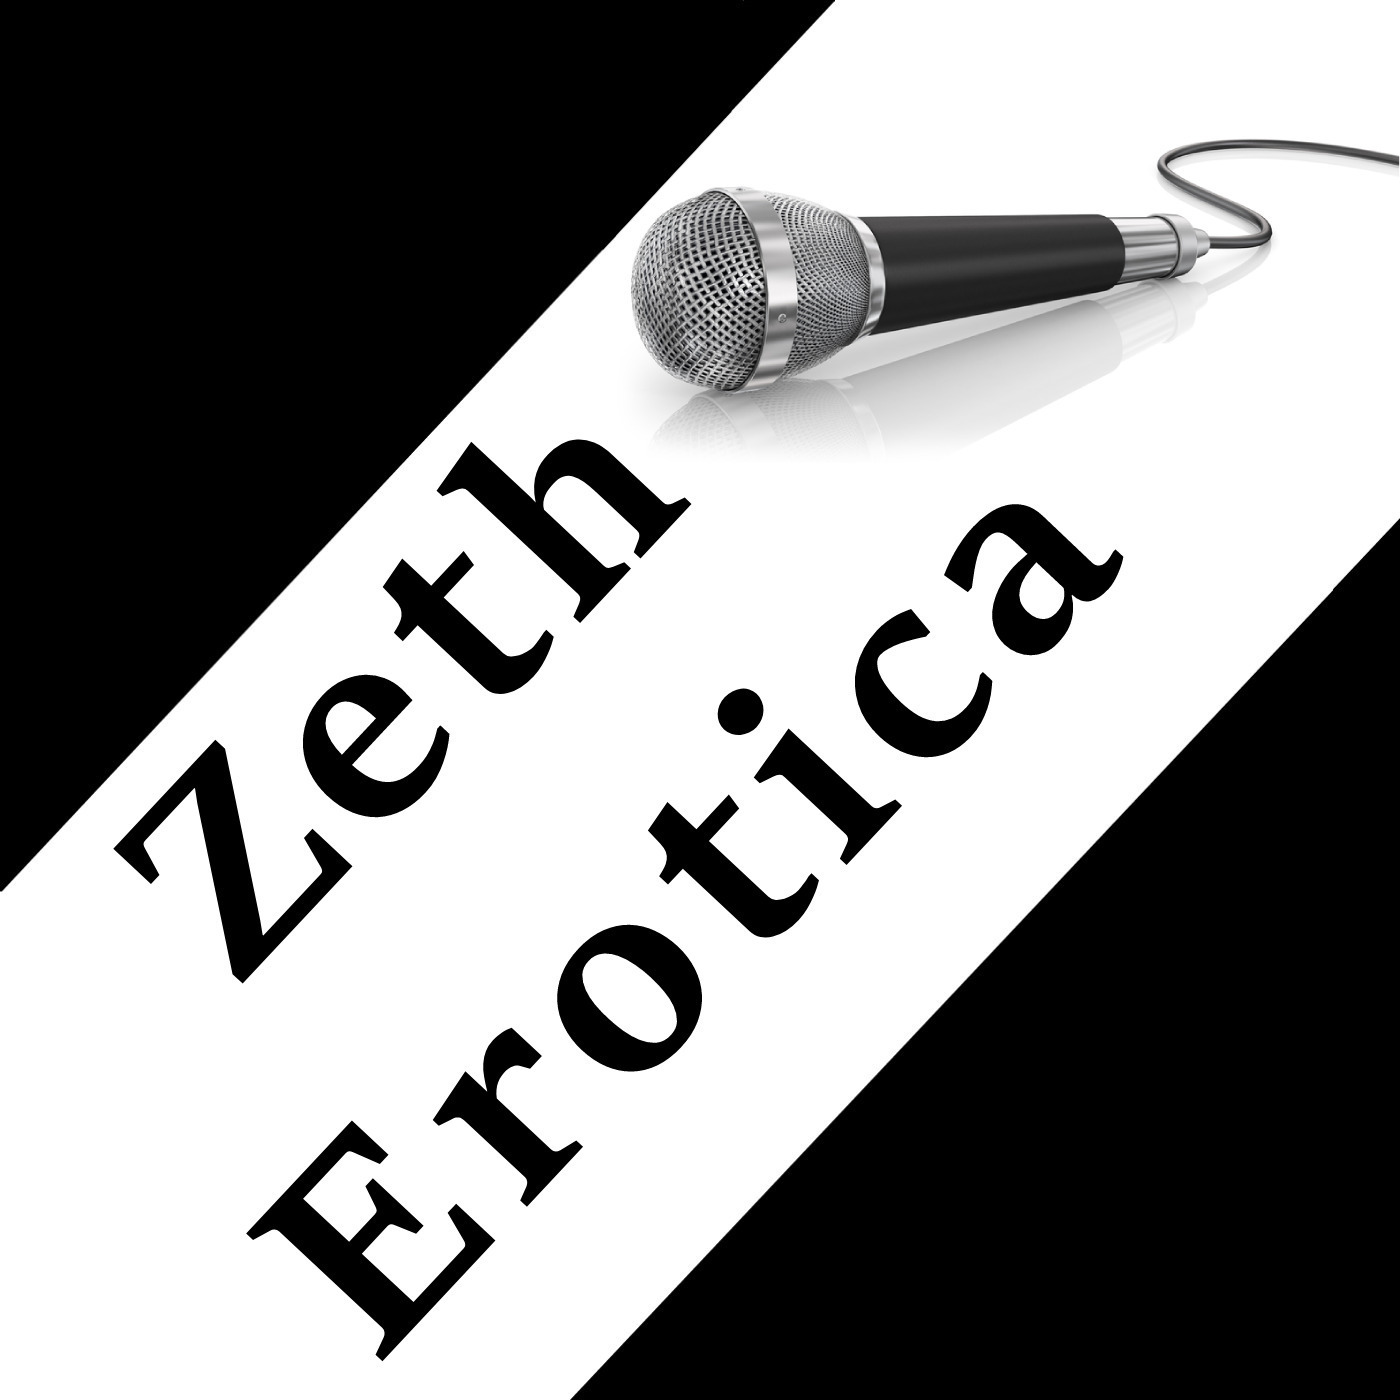 Zeth Erotica- Just a Quick Excerpt From A Story- Male Erotica for Men